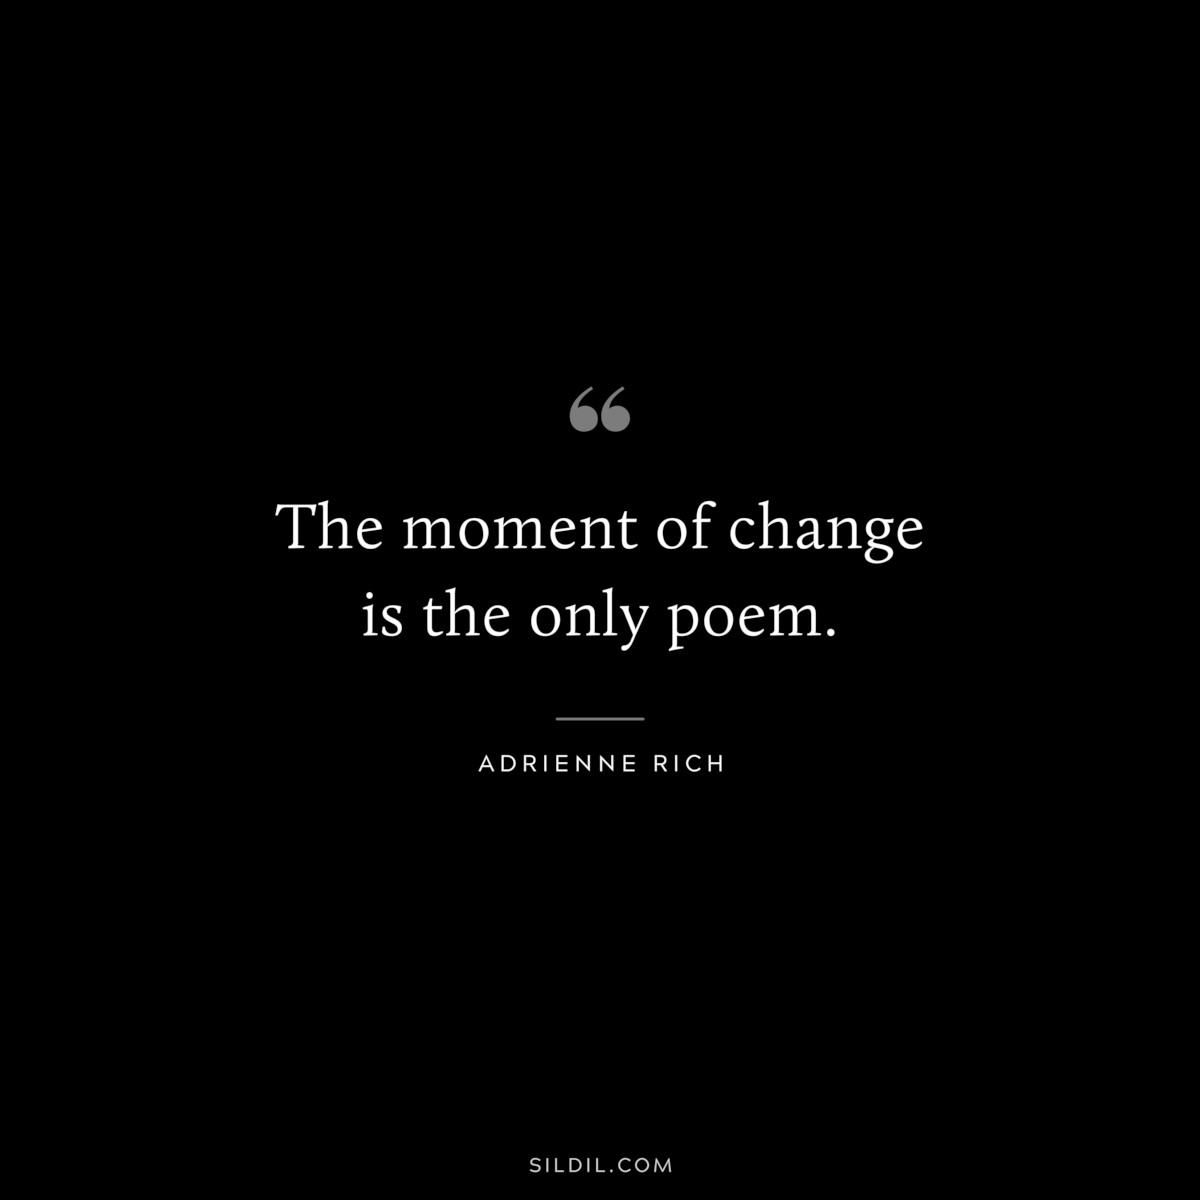 The moment of change is the only poem. ― Adrienne Rich